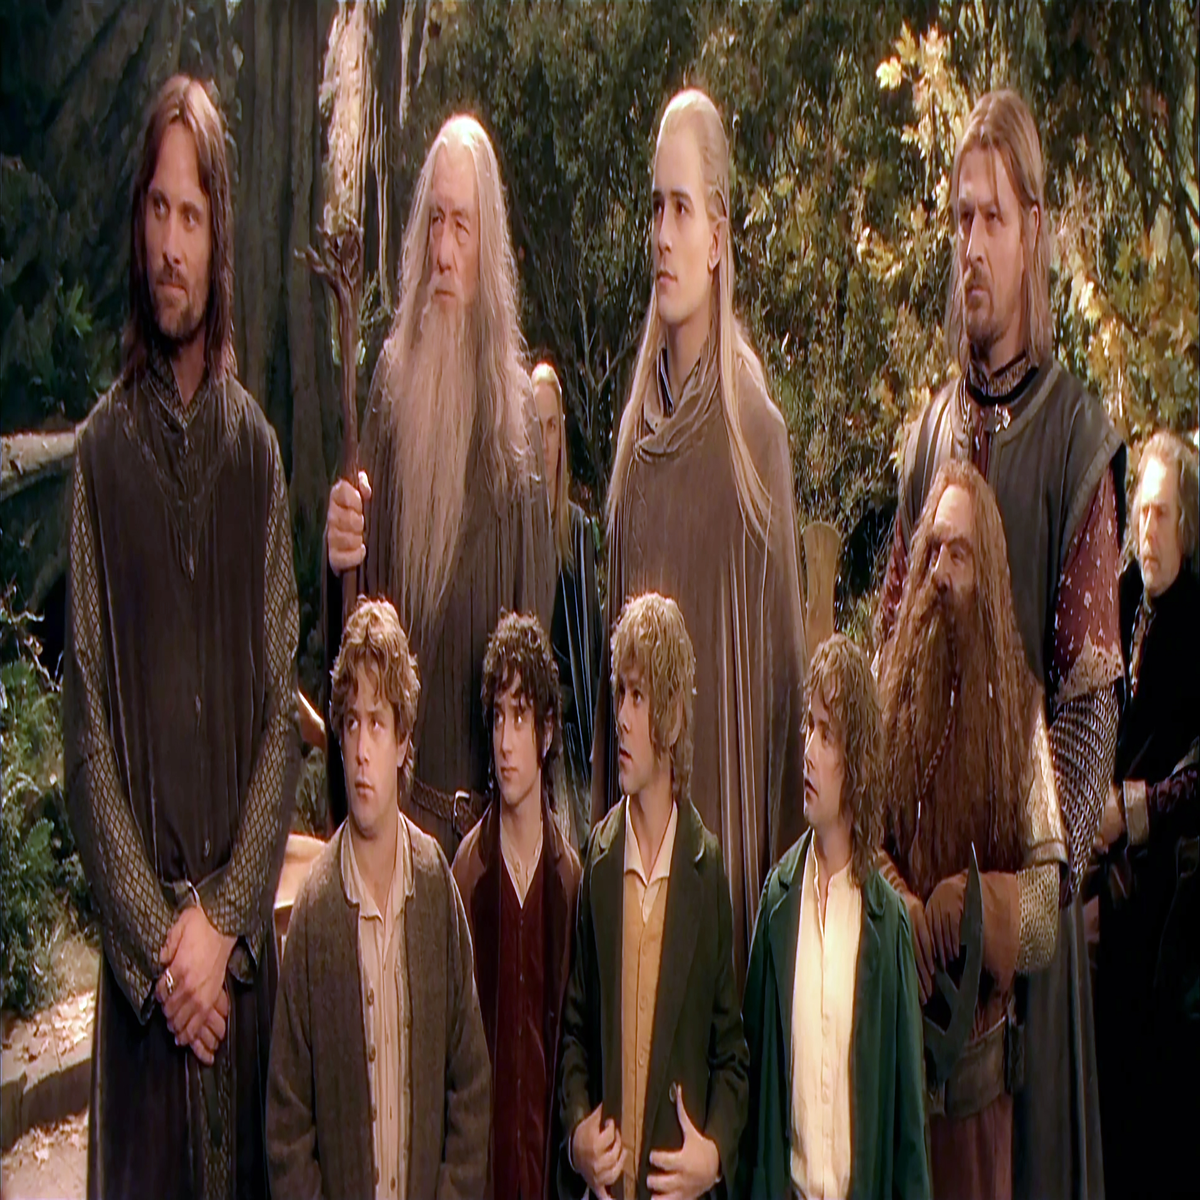 The best order to watch Lord of the Rings and The Hobbit movies